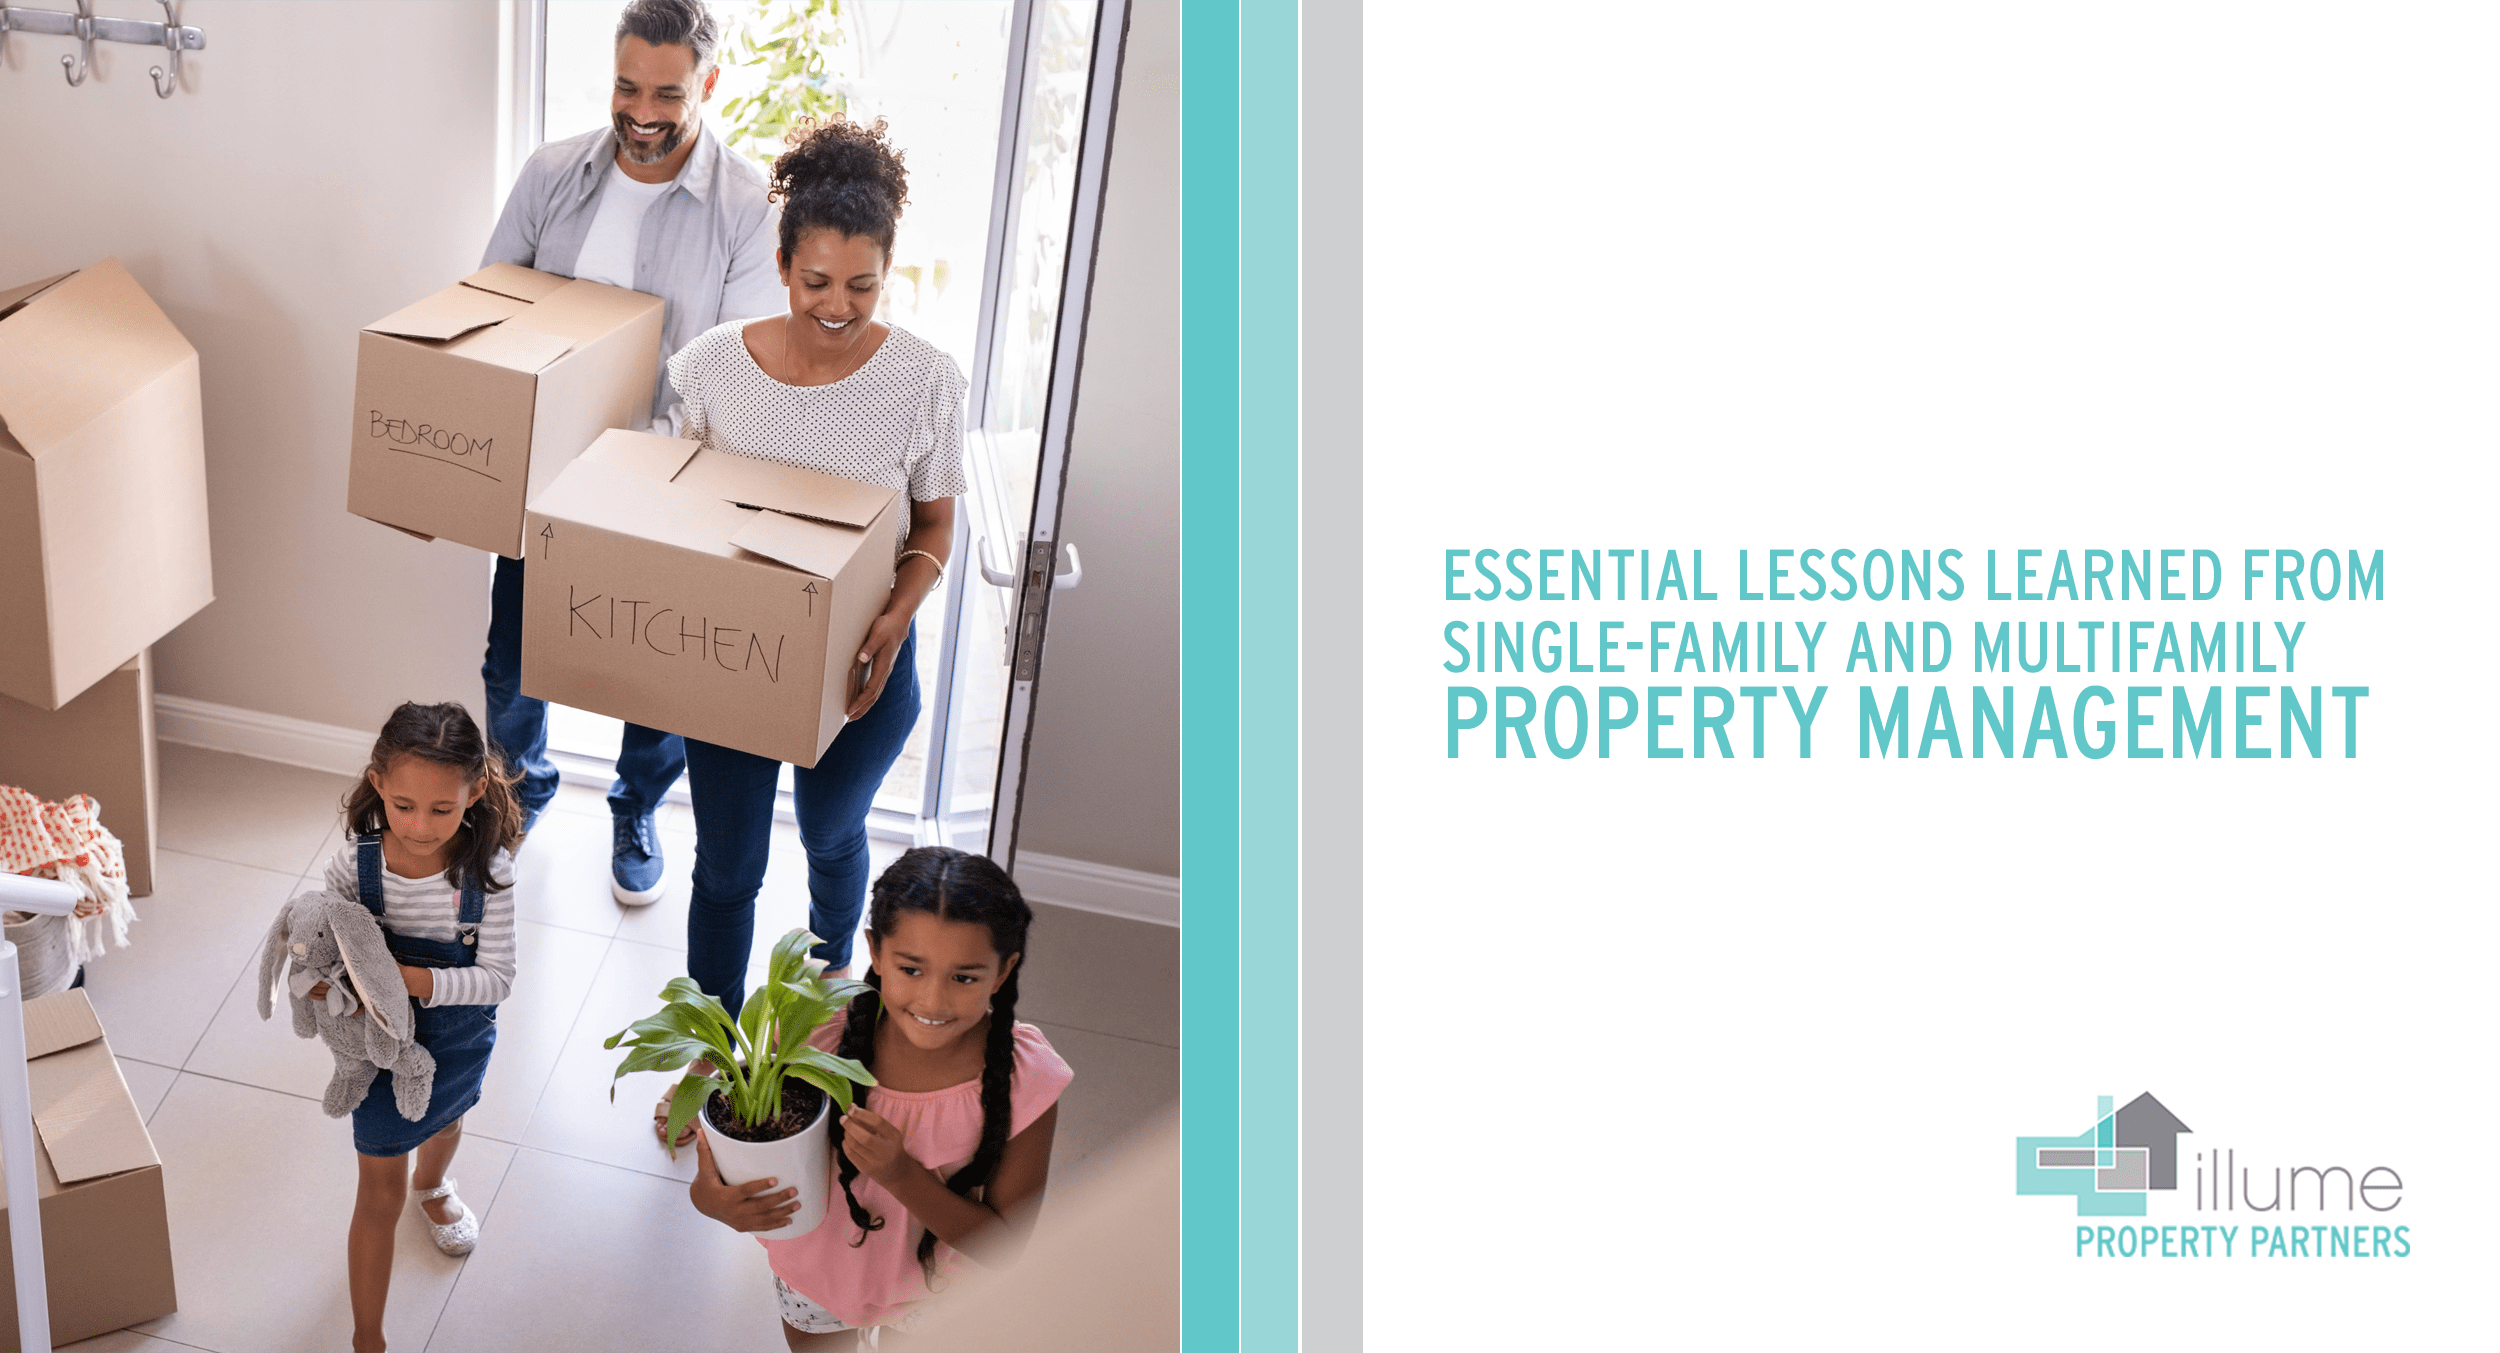 Essential Lessons Learned from Single-Family and Multifamily Property Management